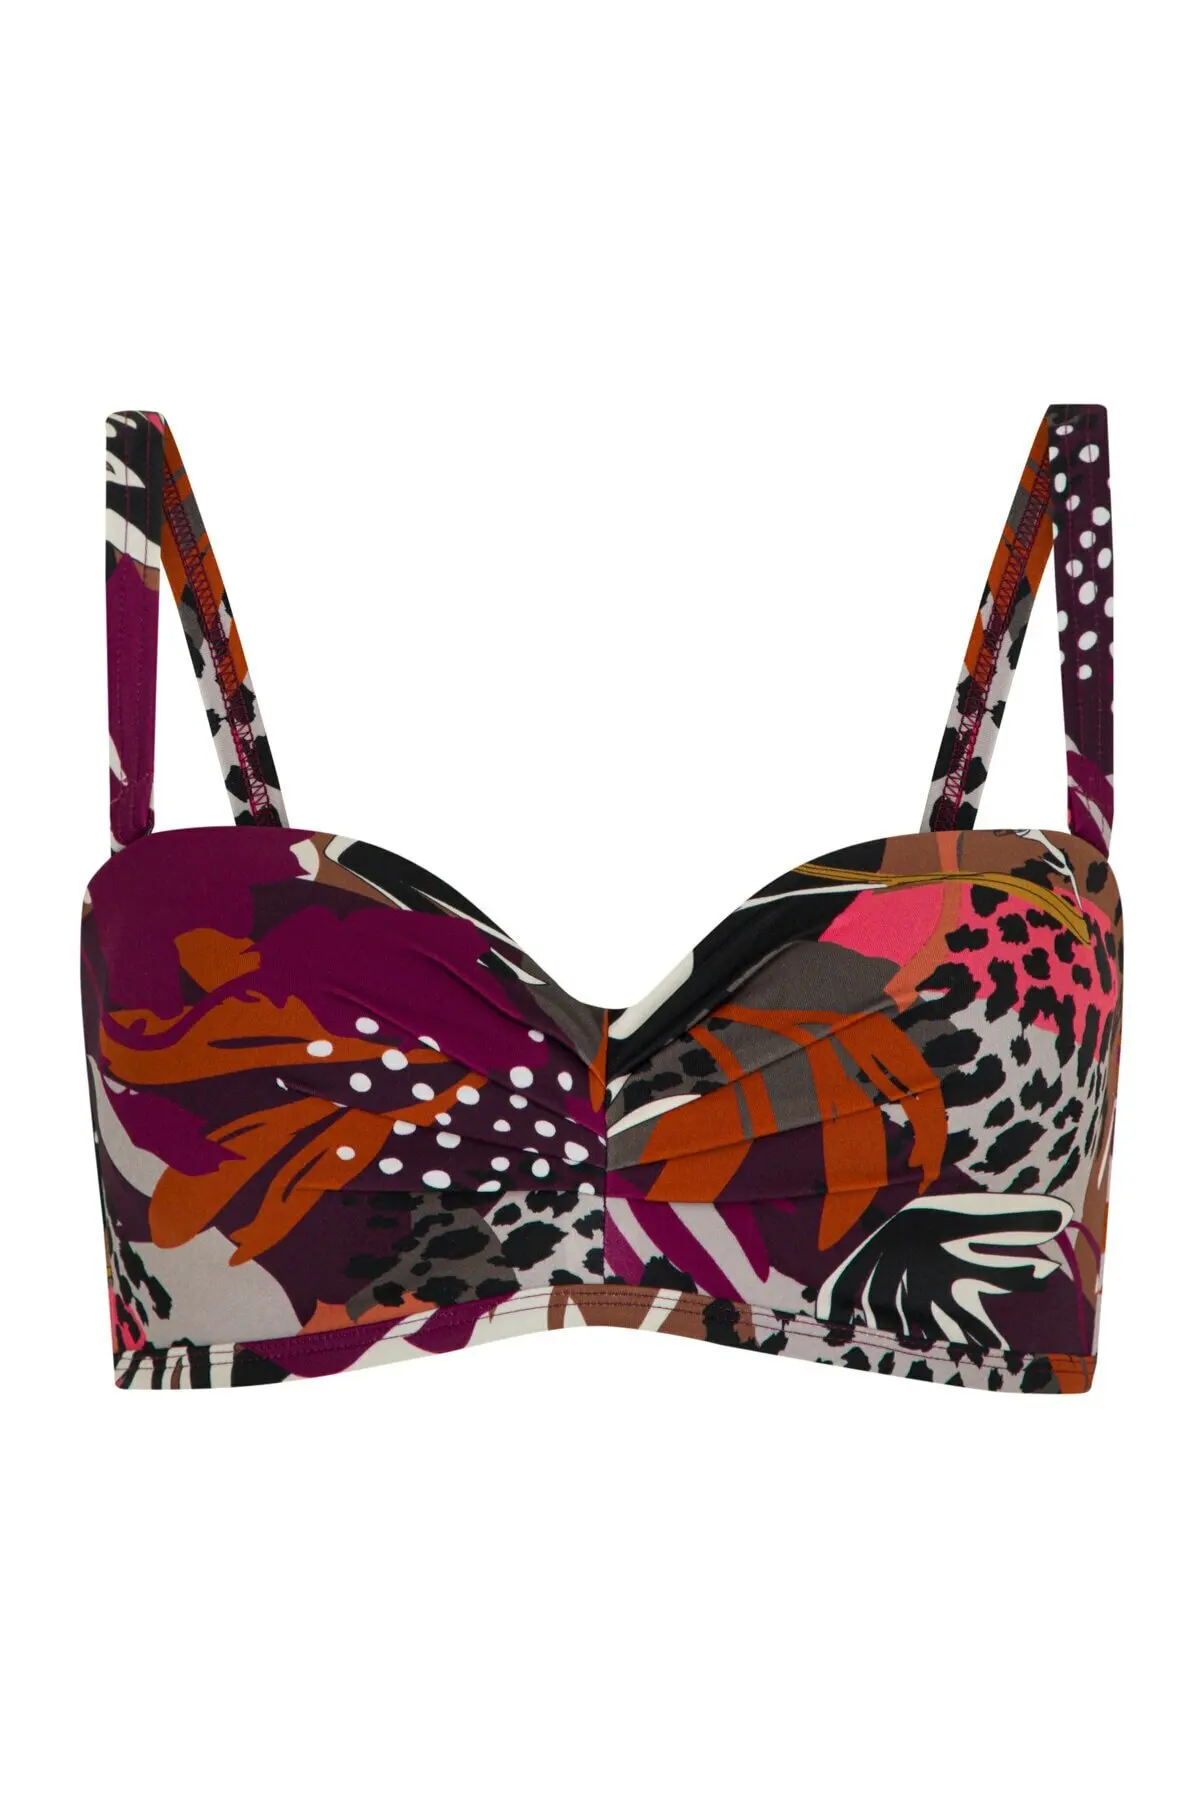 LOOK FOR YOUR WONDERFUL NIGHTS WITH ITS STUNNING Women's Multicolored Chaotic Lotus Bikini Top FREE  SHIPPING